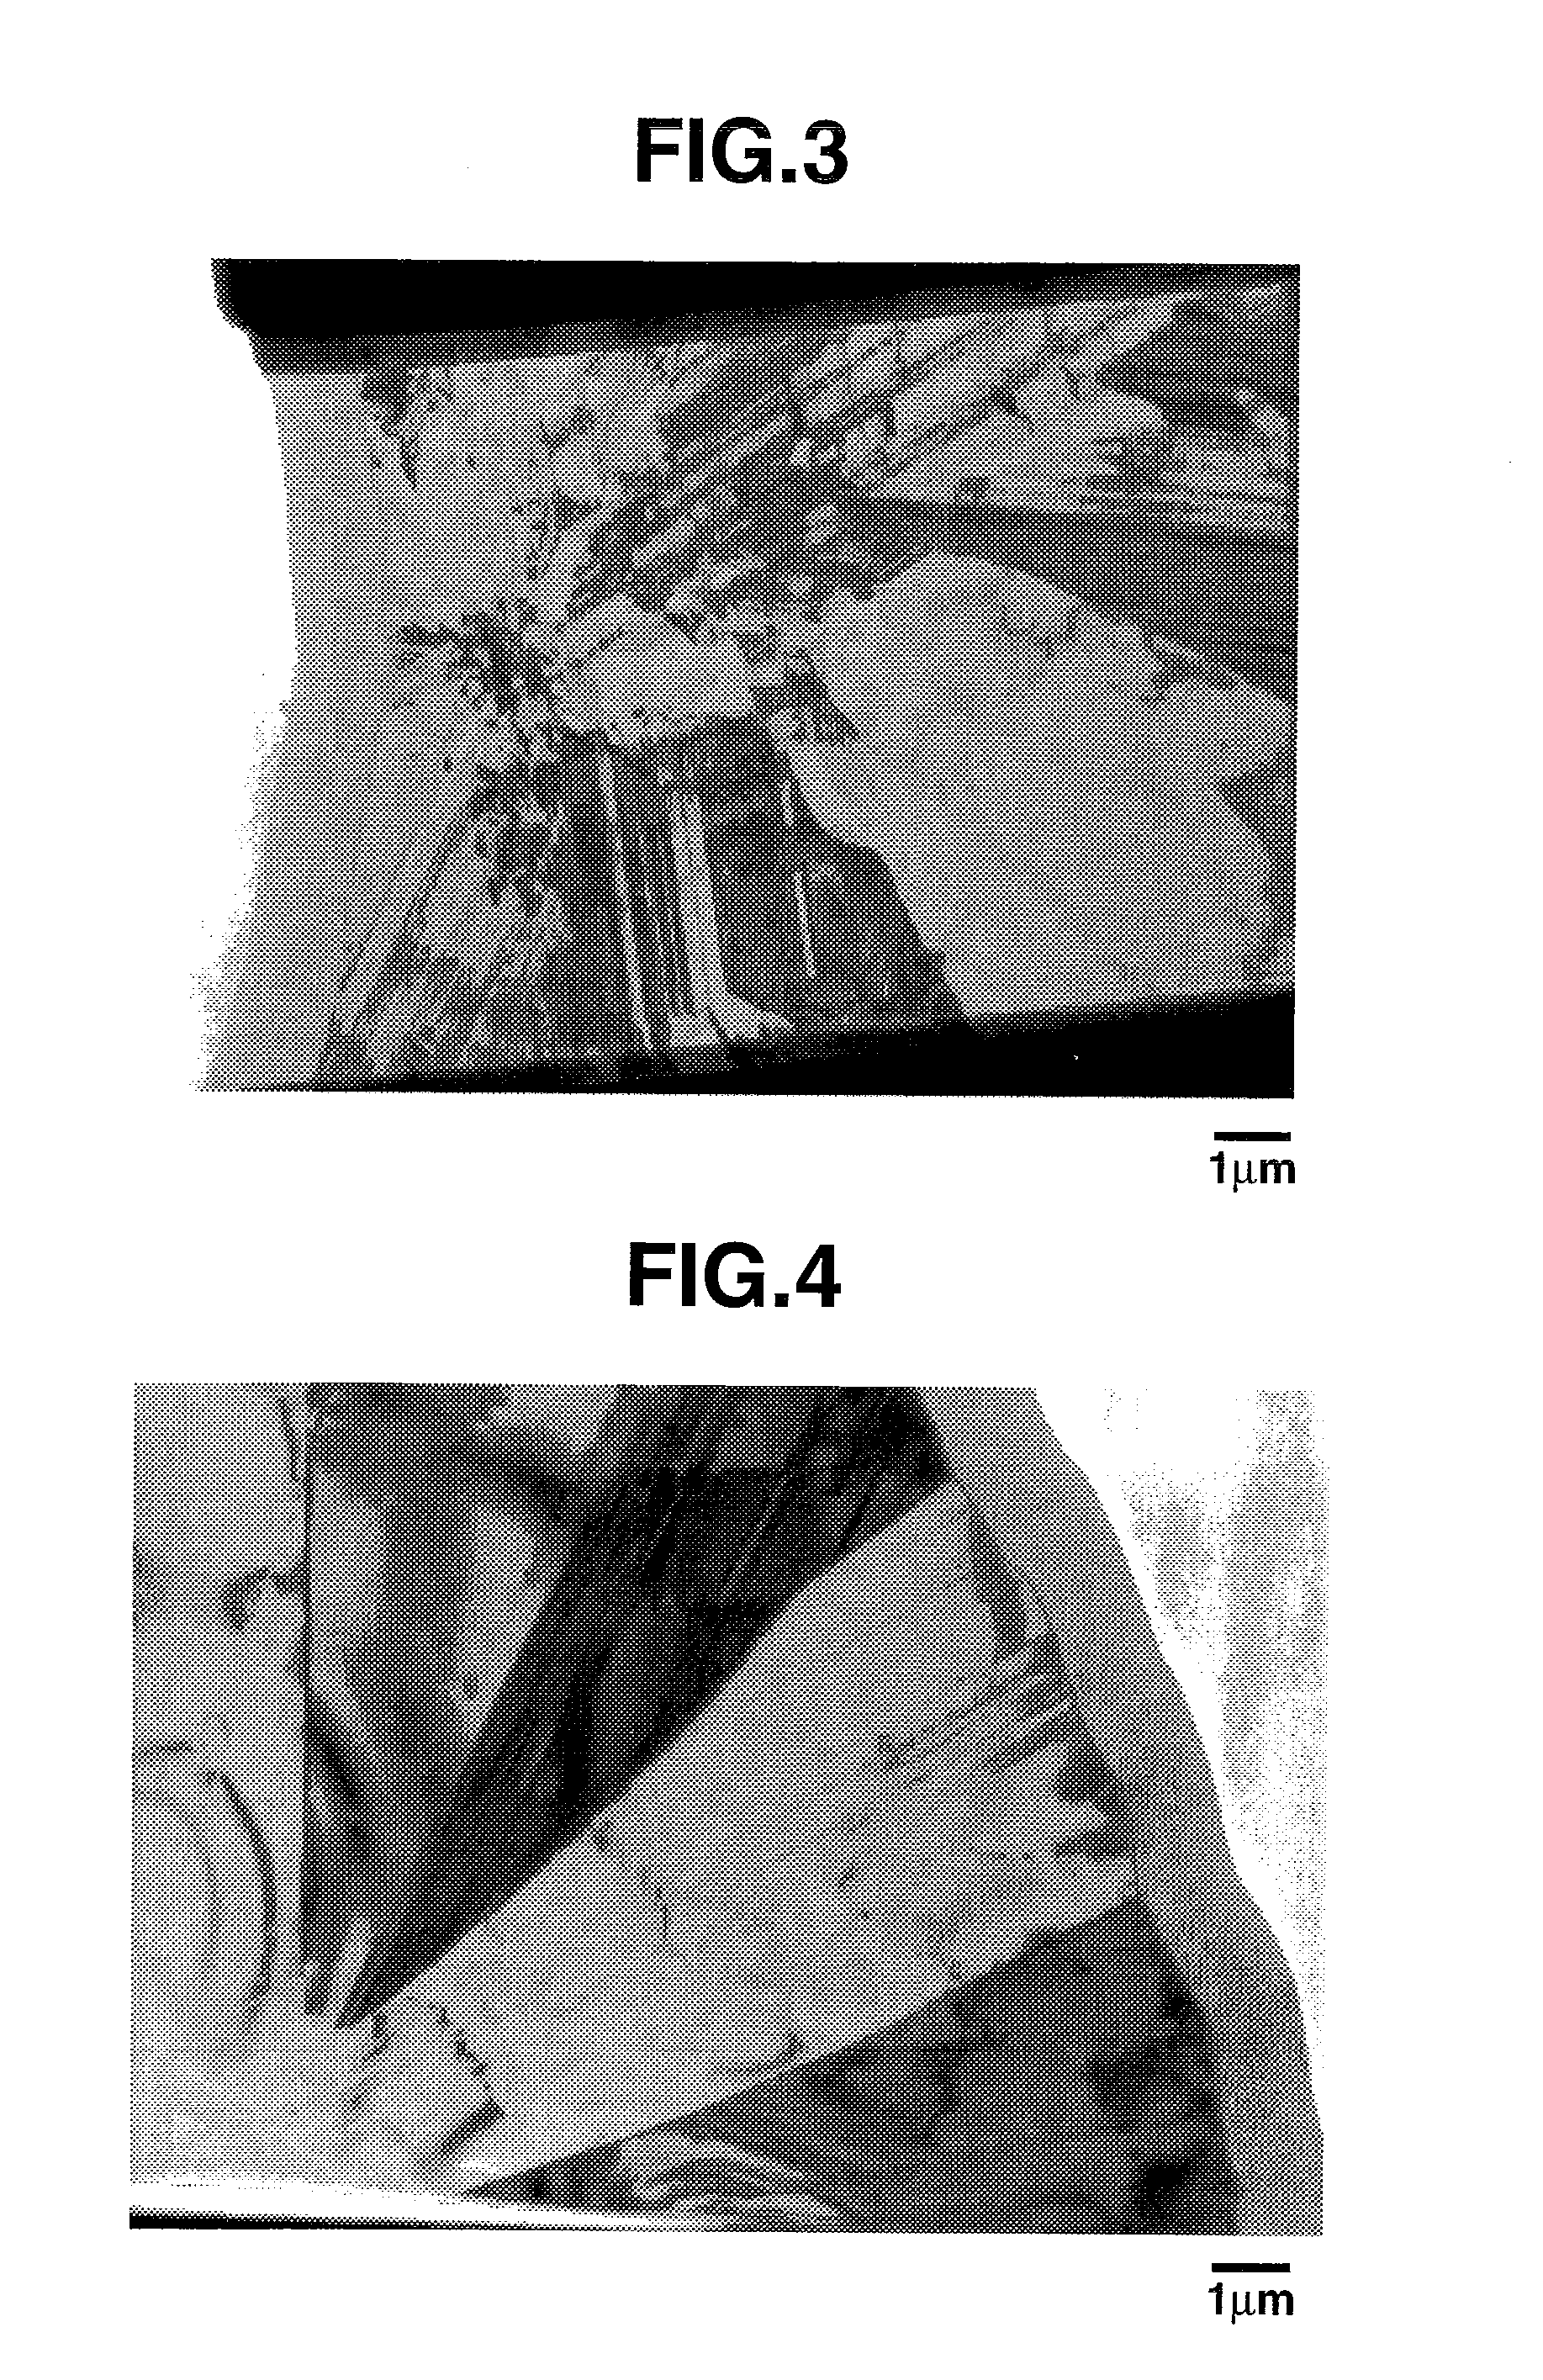 Negative electrode material for rechargeable battery with nonaqueous electrolyte, negative electrode for rechargeable battery with nonaqueous electrolyte, rechargeable battery with nonaqueous electrolyte, and process for producing polycrystalline silicon particles for active material for negative electrode material for rechargeable battery with nonaqueous electrolyte